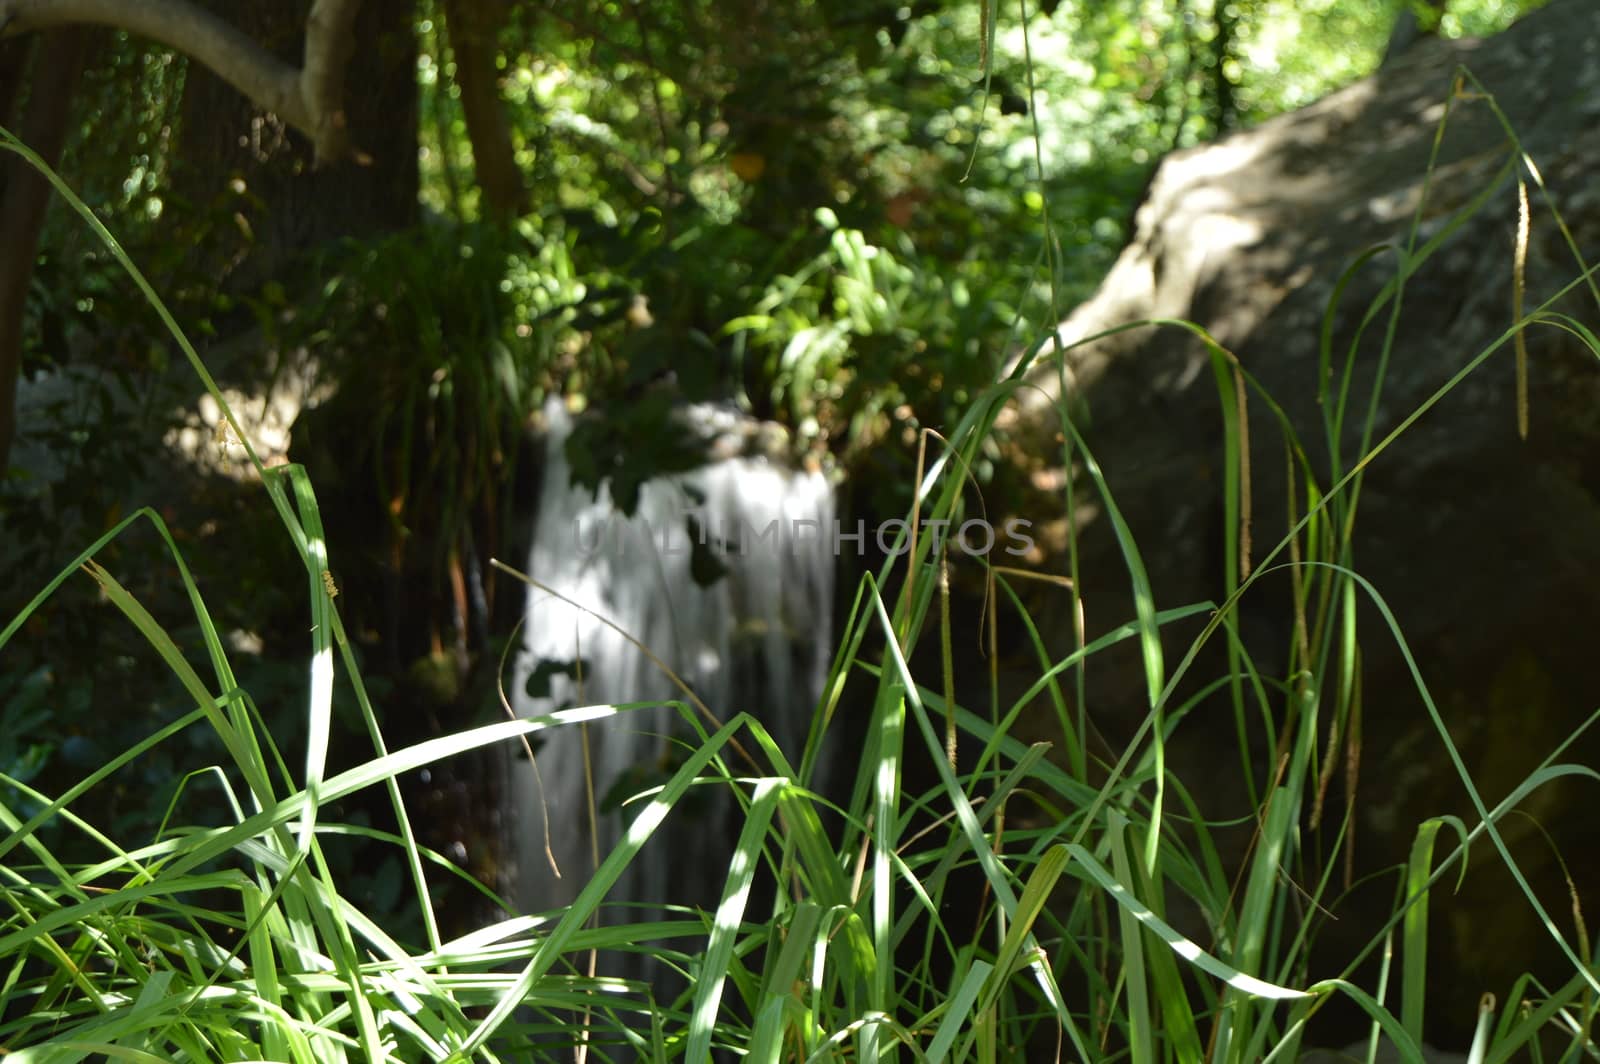 The beautiful blurred background of the waterfall is visible through the green grass in the foreground. Sunlight breaks through the shade of trees.